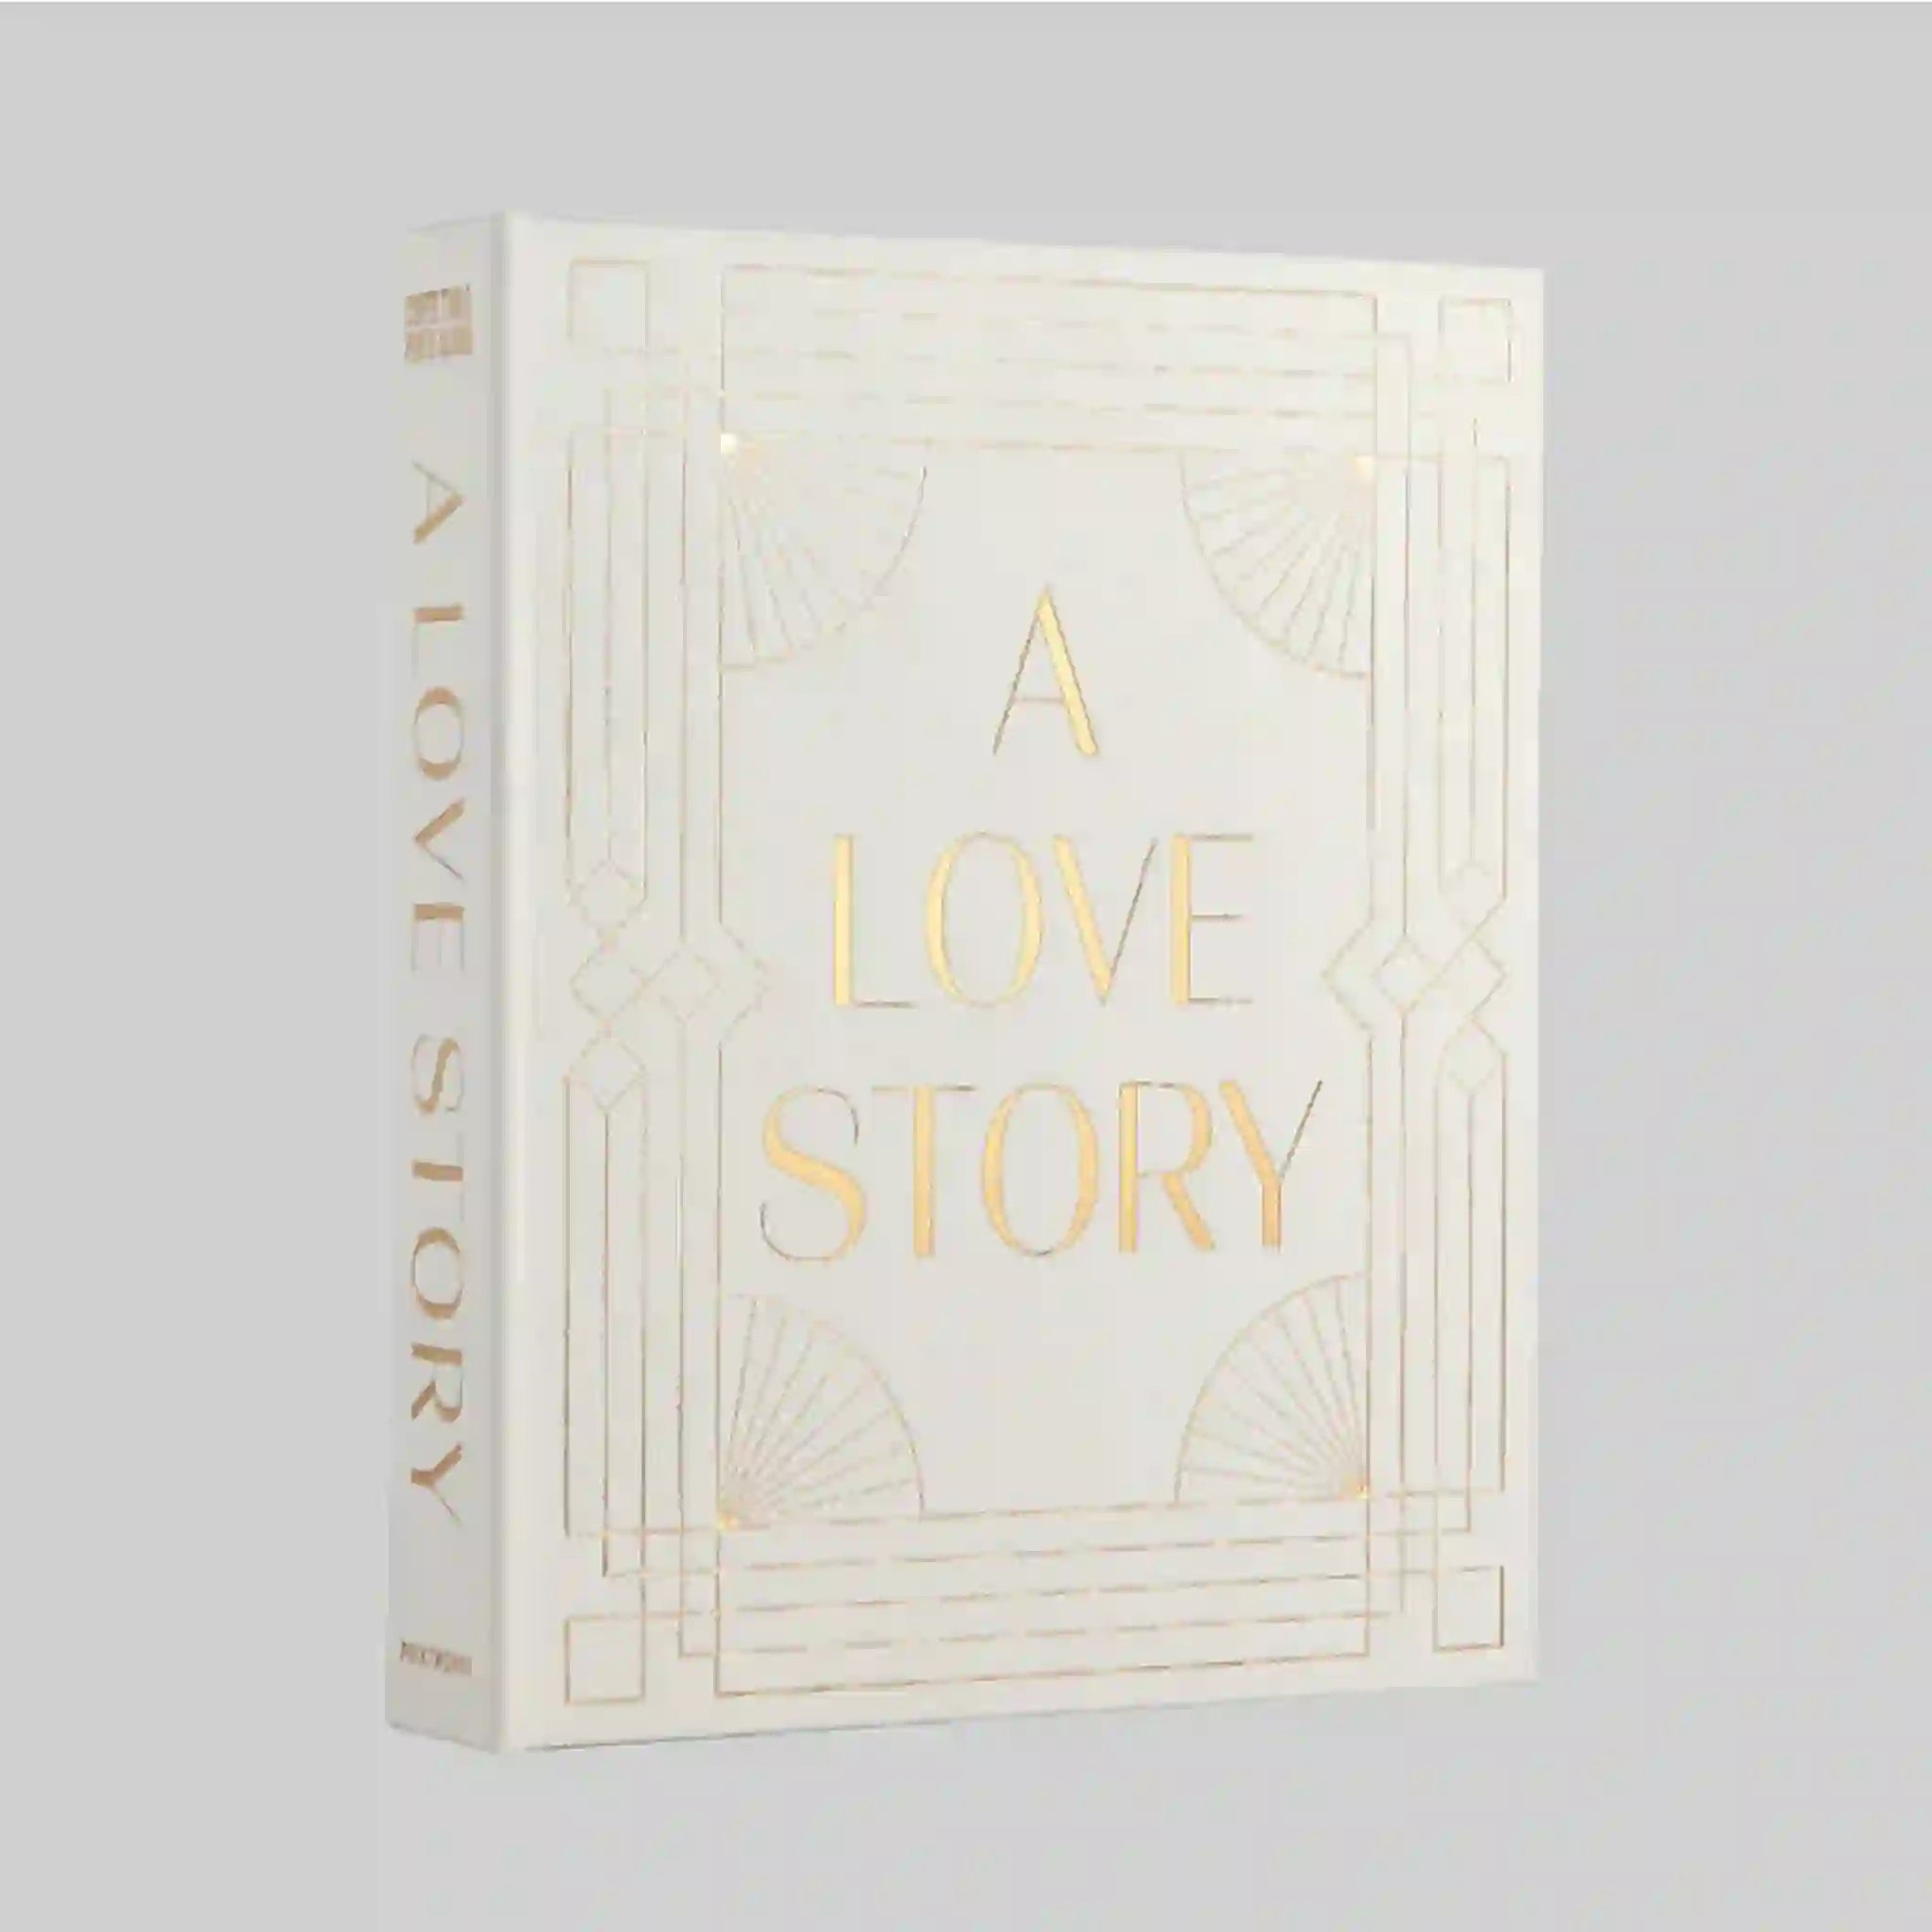 On a grey background is an ivory photo album cover with gold text that reads, "A Love Story". 